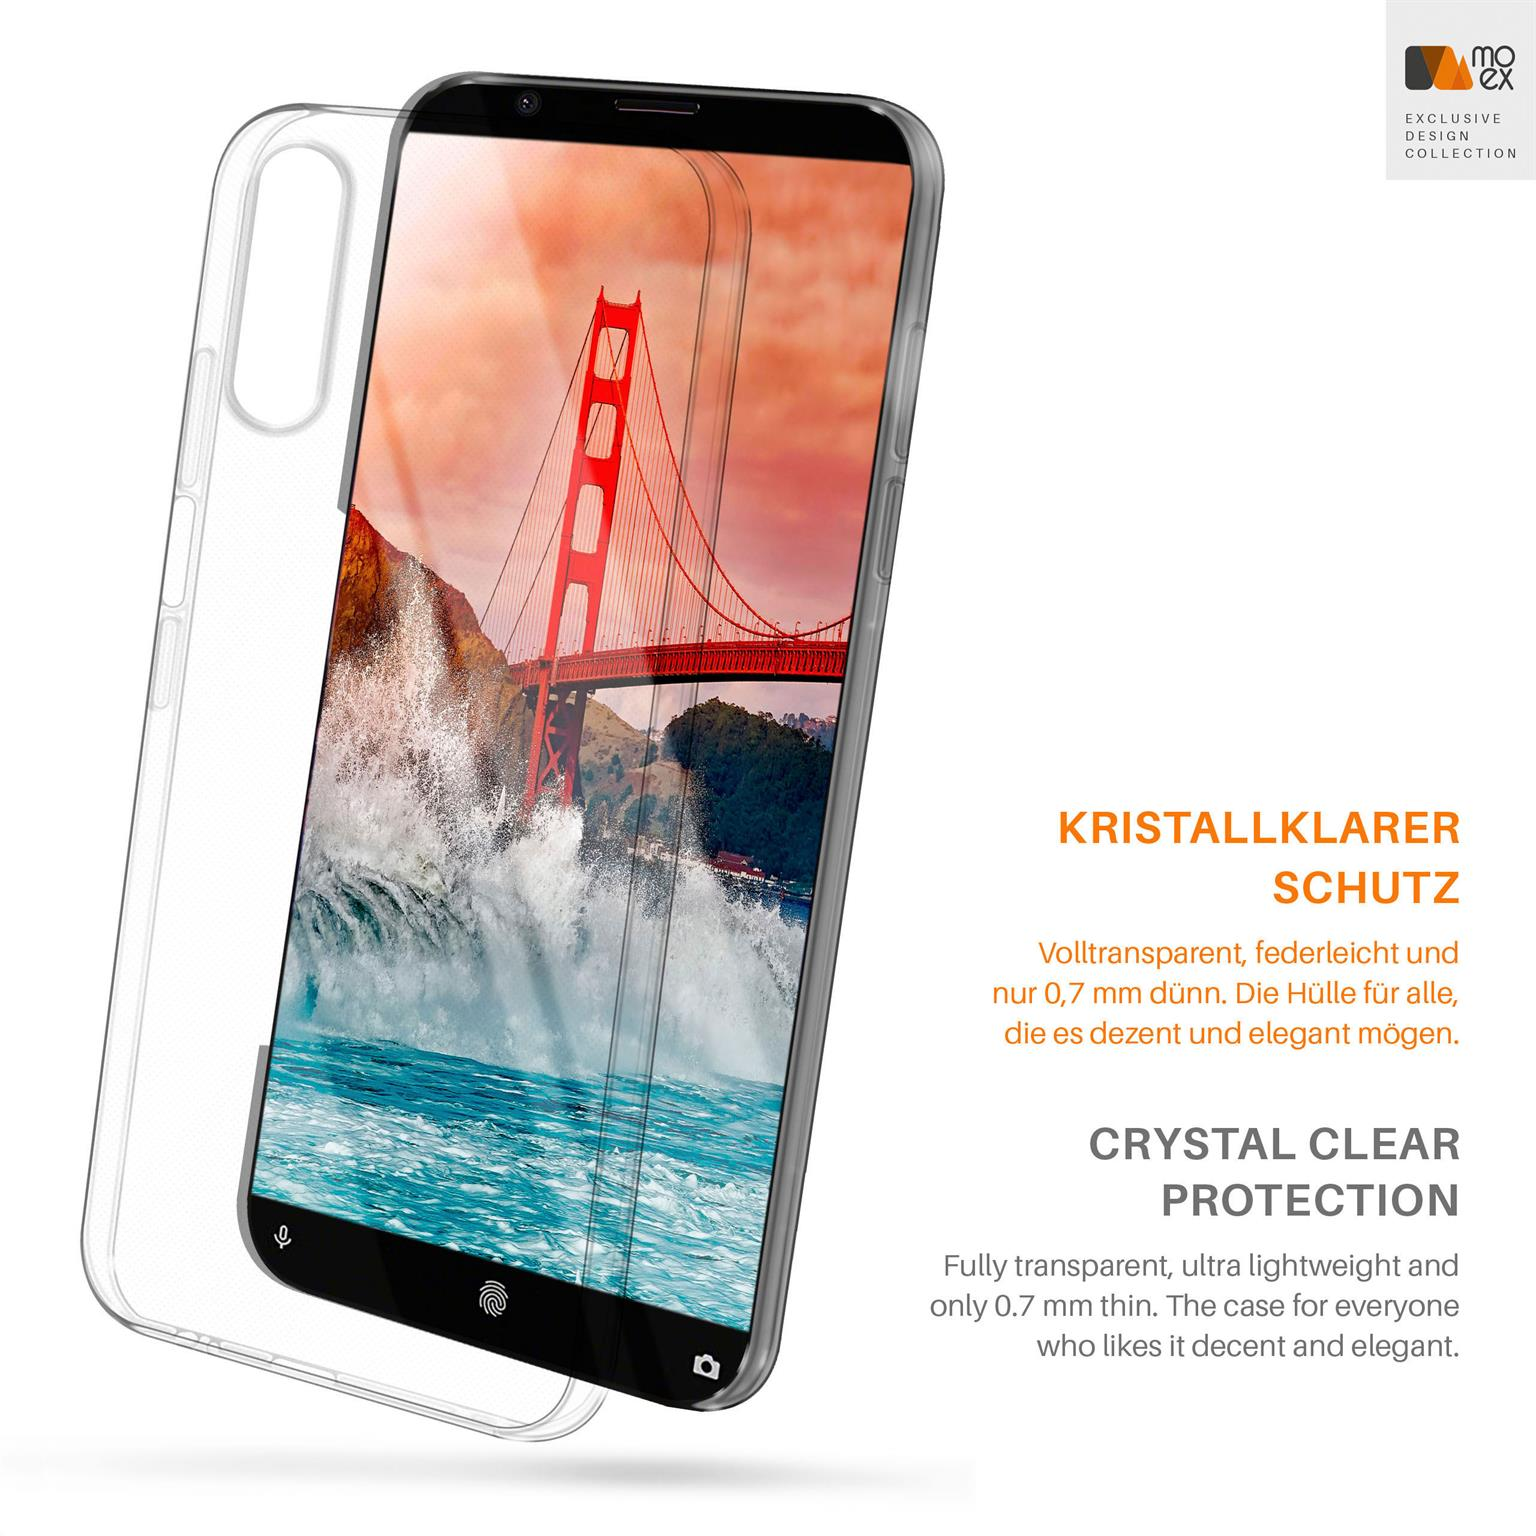 Case, MOEX Crystal-Clear Sony, Aero Xperia Backcover, 5,